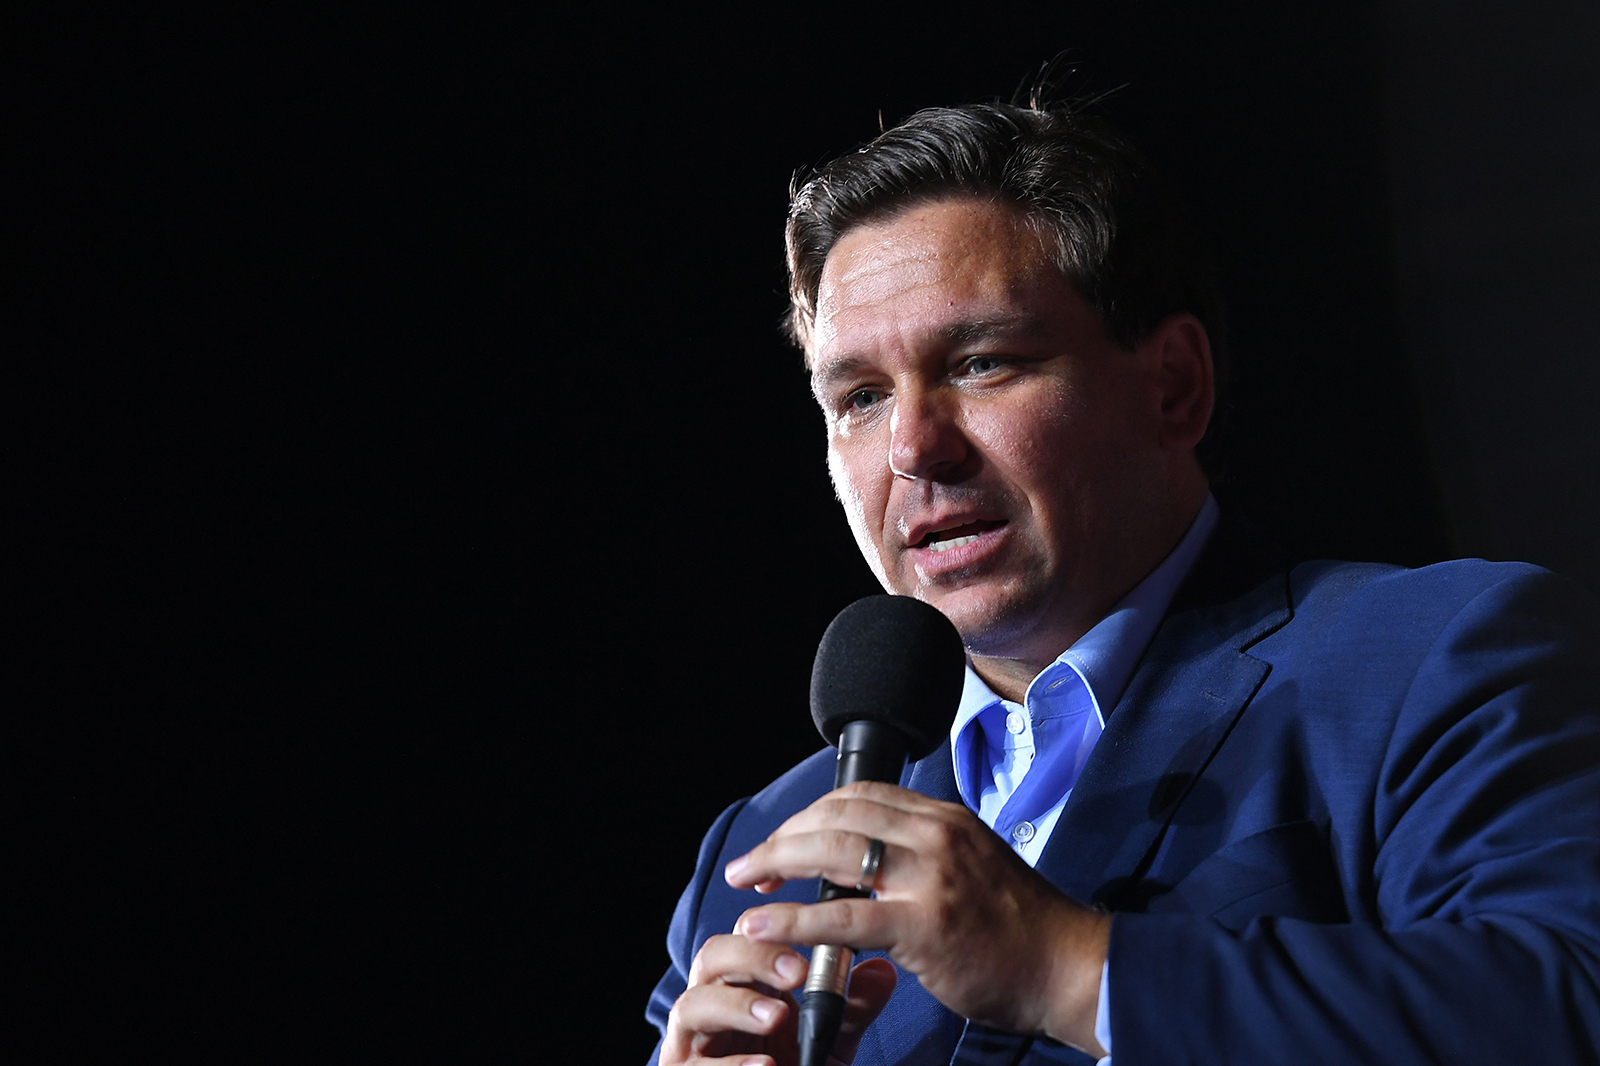 Florida Gov. Ron DeSantis speaks during a campaign rally for President Donald Trump at Pensacola International Airport in Pensacola, Florida, on October 23.